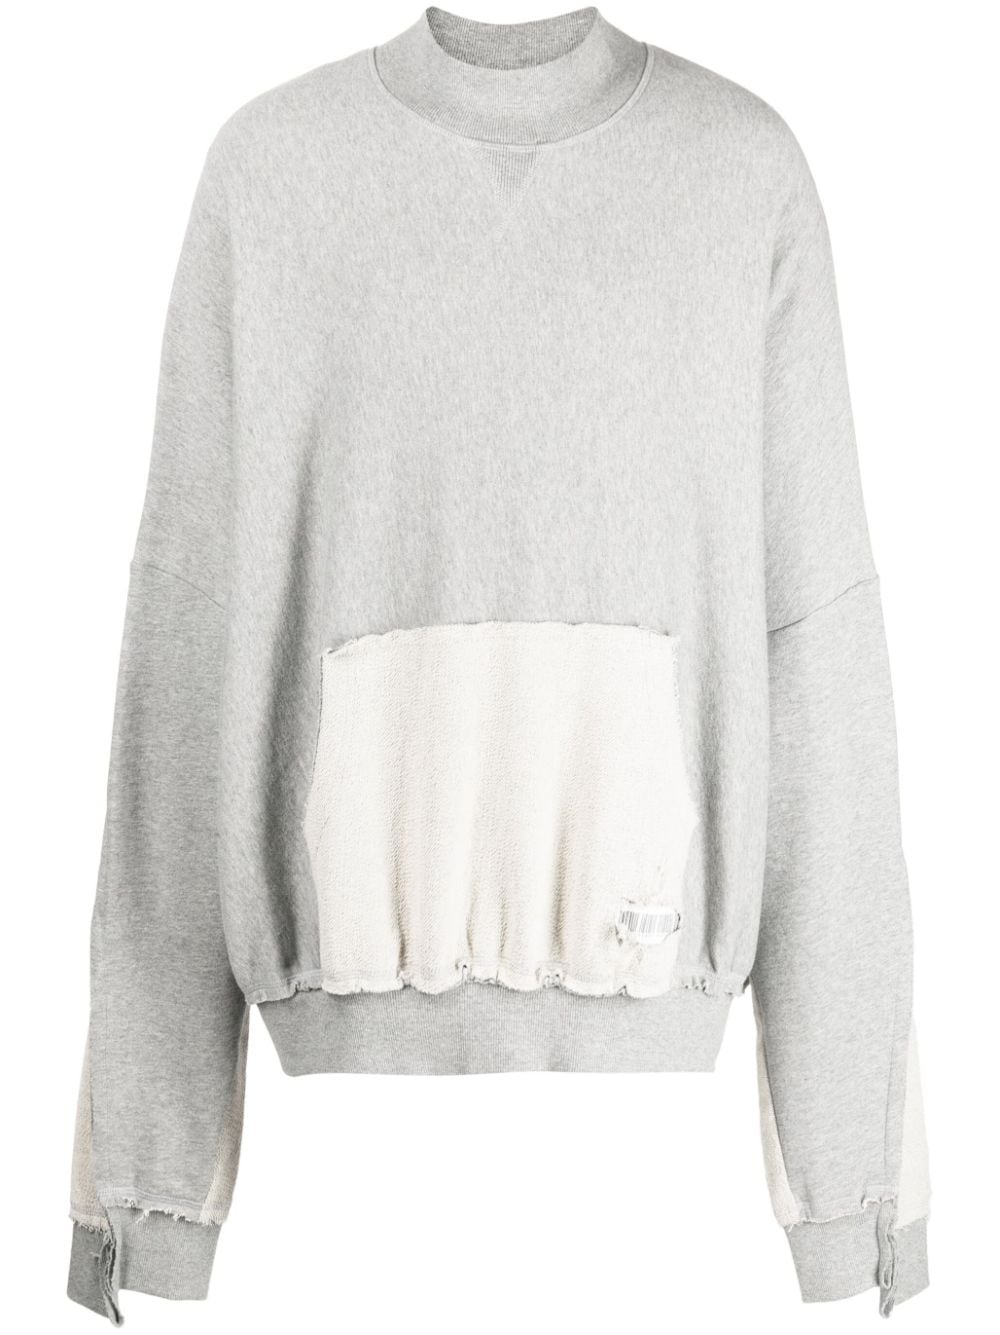 Mostly Heard Rarely Seen exposed-seam brushed cotton sweatshirt - Grey von Mostly Heard Rarely Seen